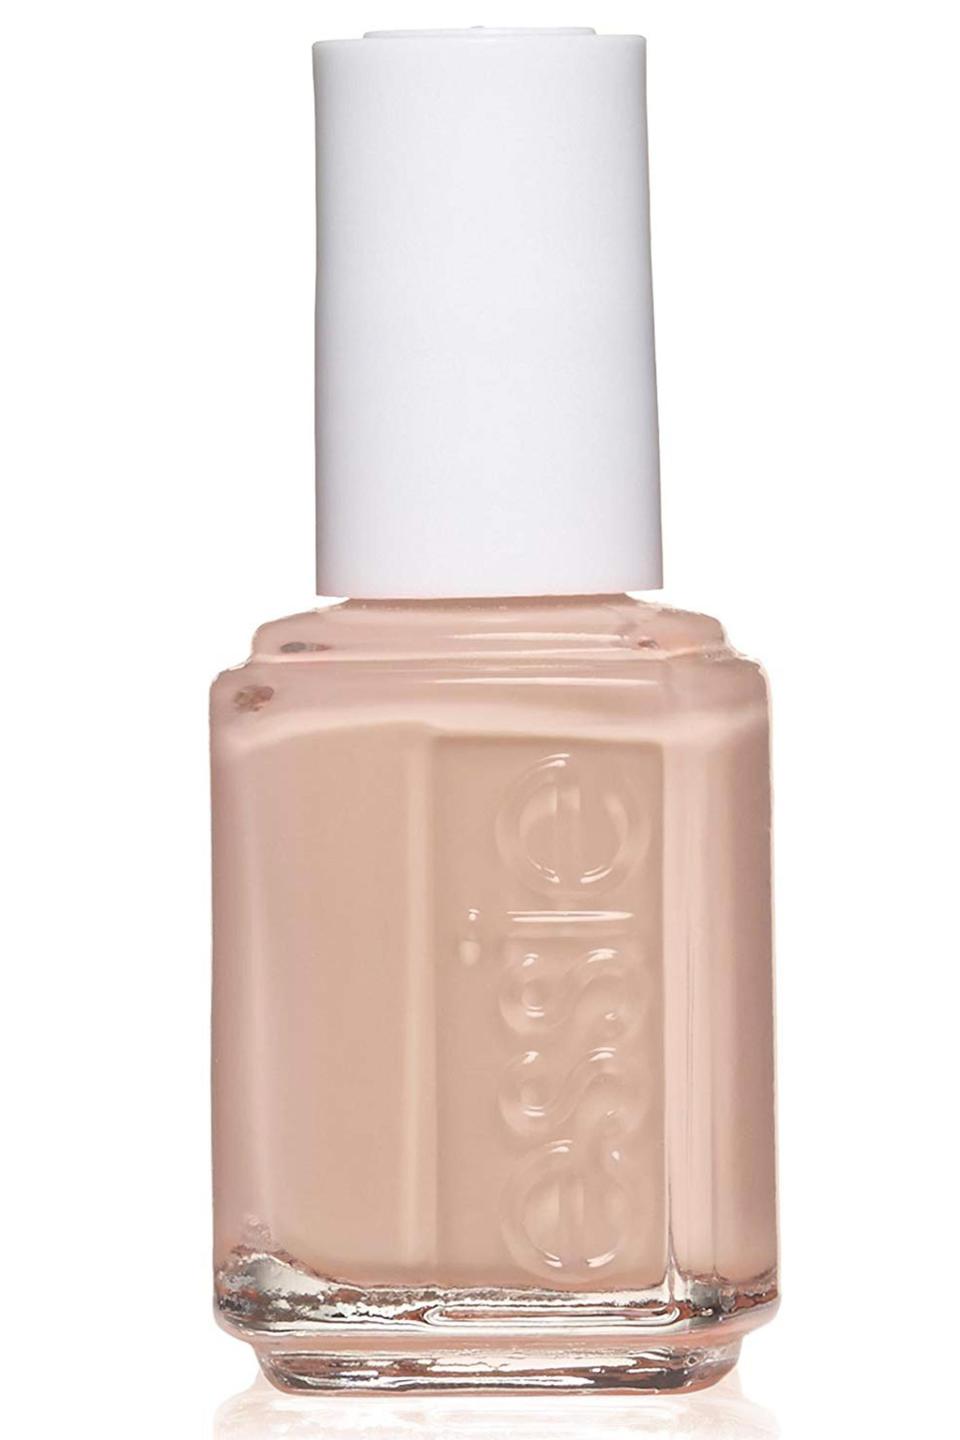 24) Essie Nail Color Polish in Spin The Bottle